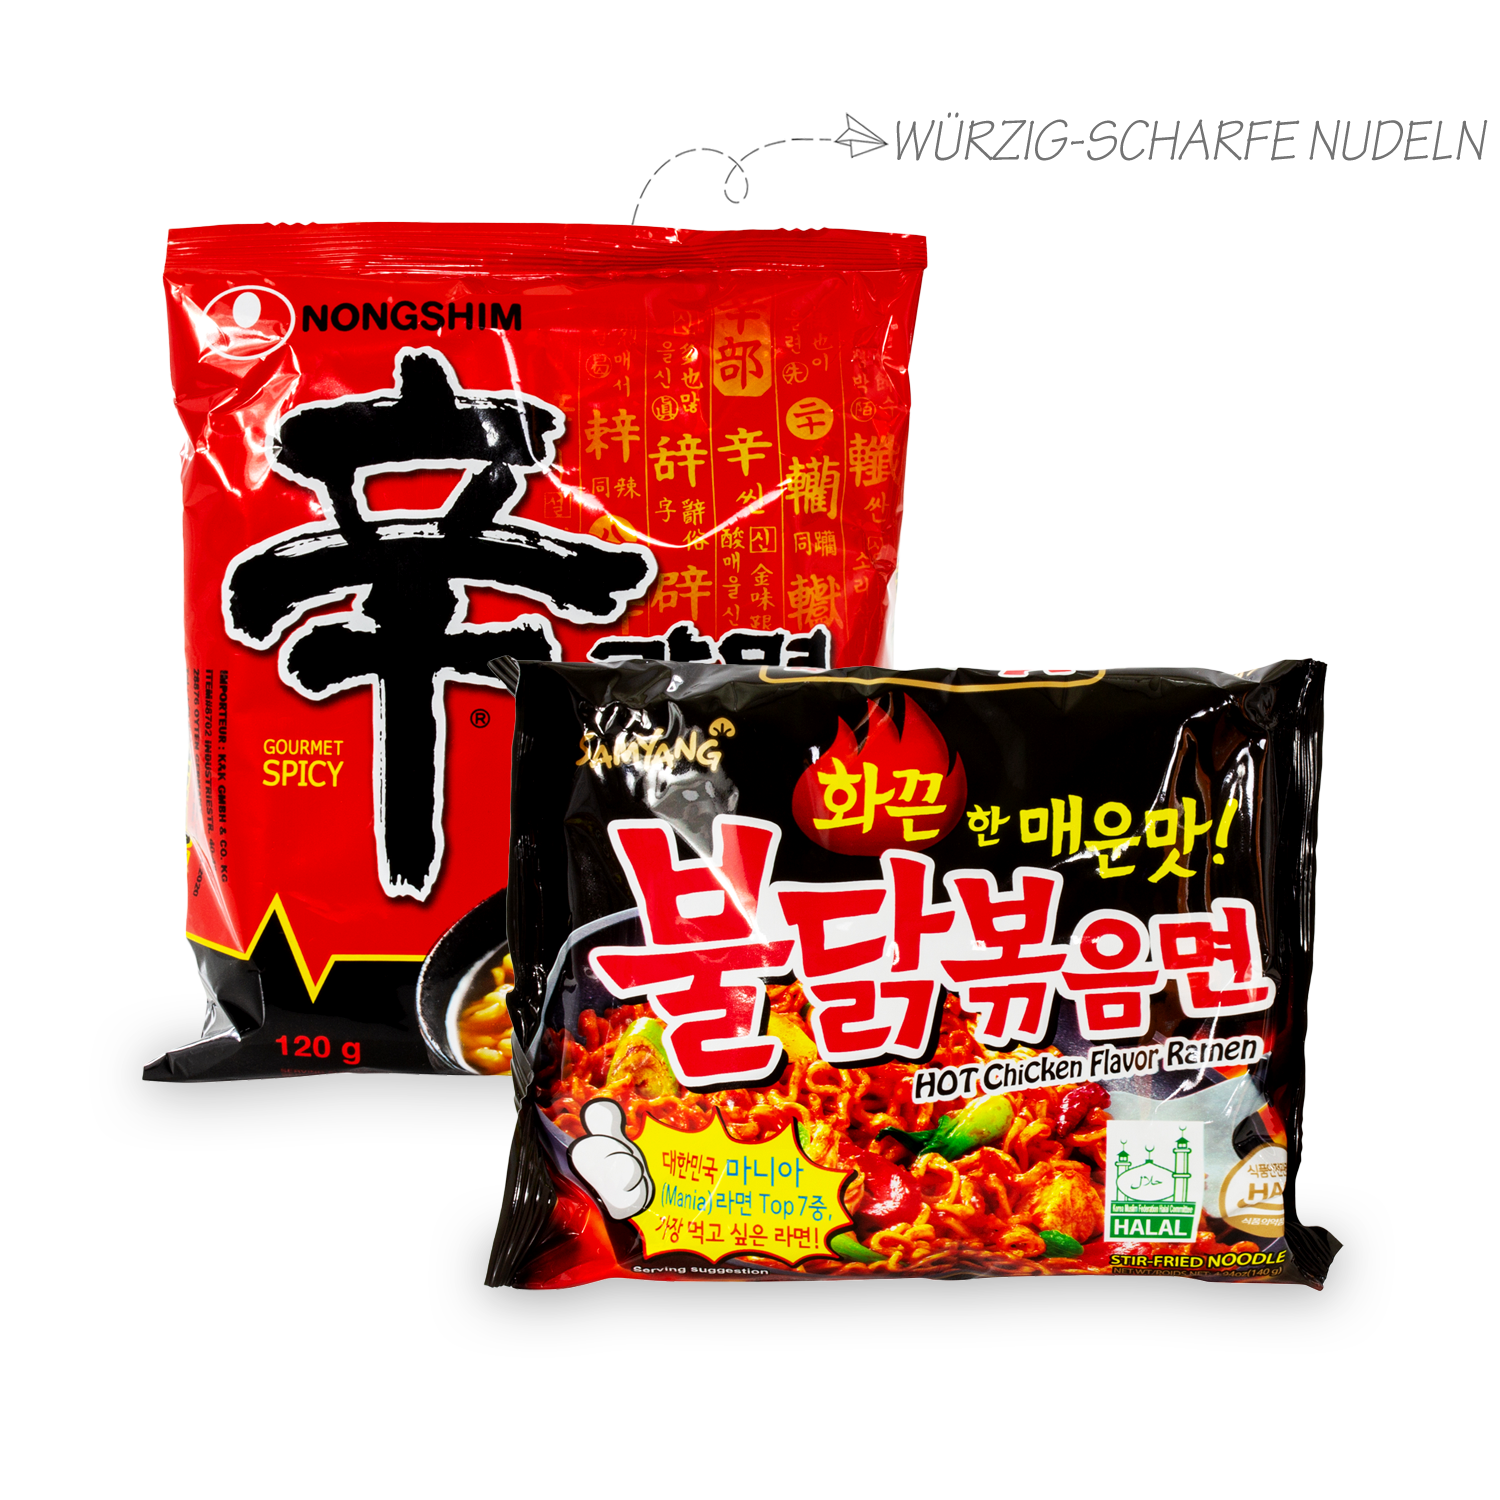 Guksu: surprise boxes with Korean instant noodles in packs of 8 and 16